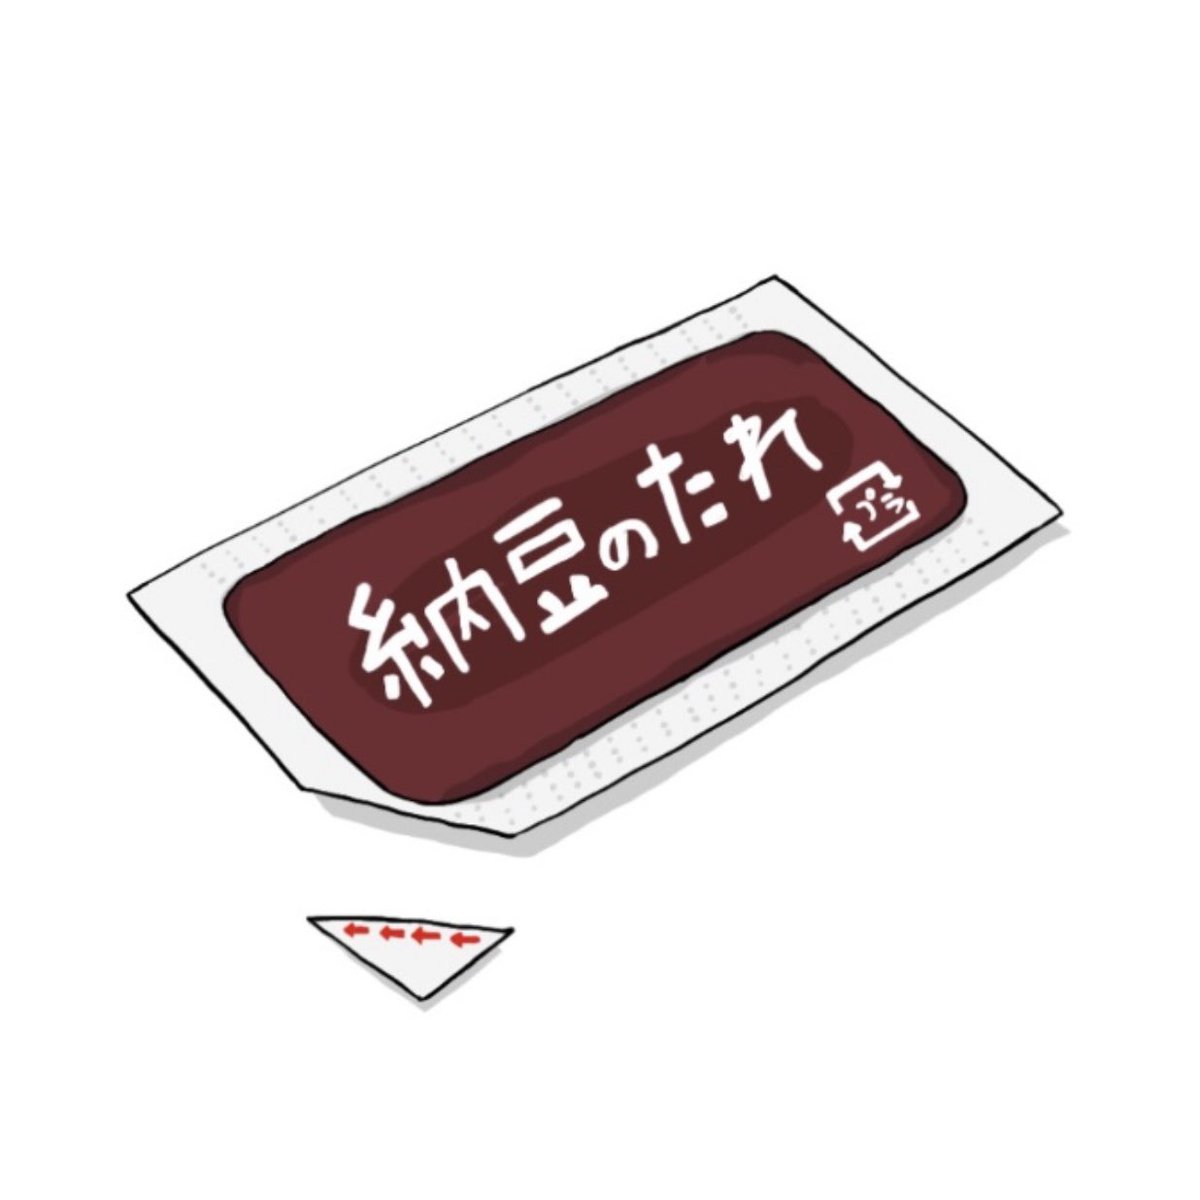 curry rice curry rice no humans food white background spoon  illustration images